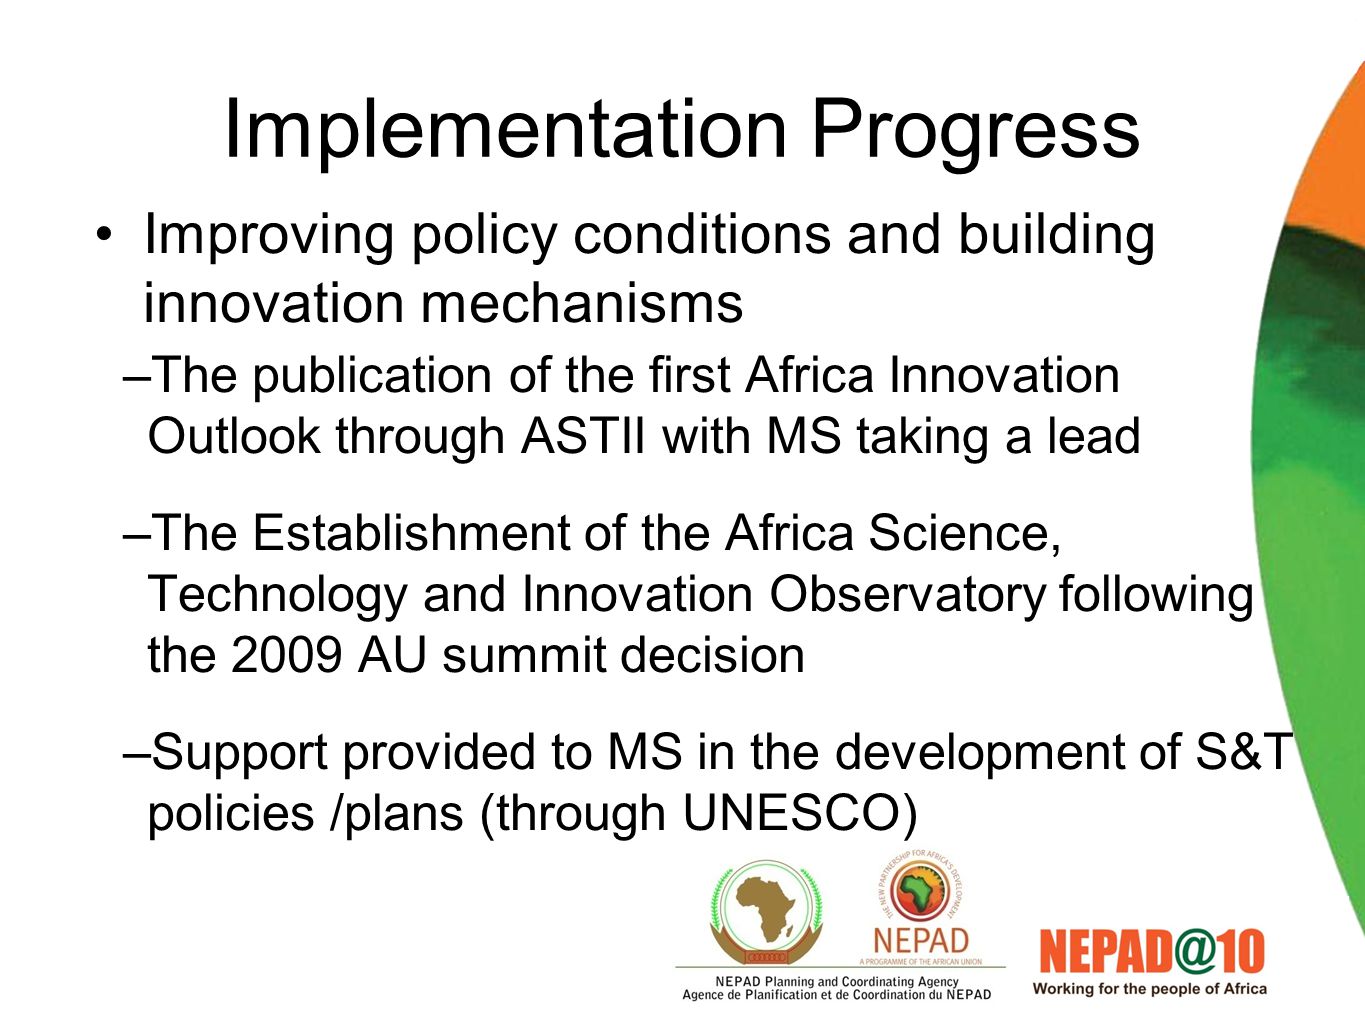 Implementation Progress Promotion of innovation –Establishment of biosciences, mathematical sciences, water sciences, lesser technology … centers of excellence –Regional R&D flagship programmes have been implemented through the COE with some showing promising results –Training of African young scientists through COE and African Universities –Implementation of the book of light house projects (call for research grants currently running) –Establishment of the Pan-African University